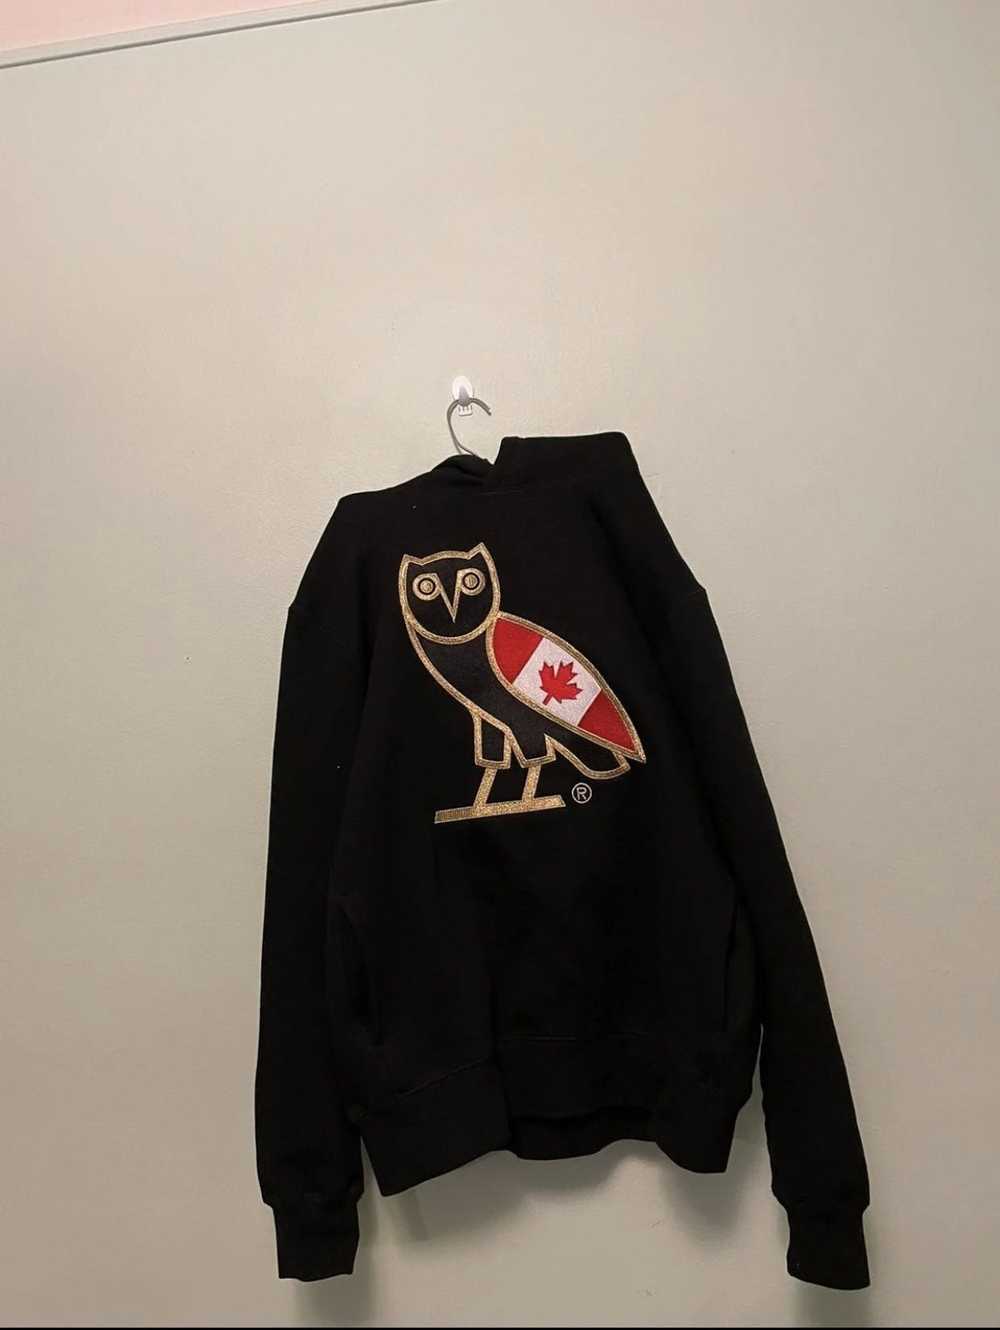 Octobers Very Own OVO flag Canada Hoodie - image 1